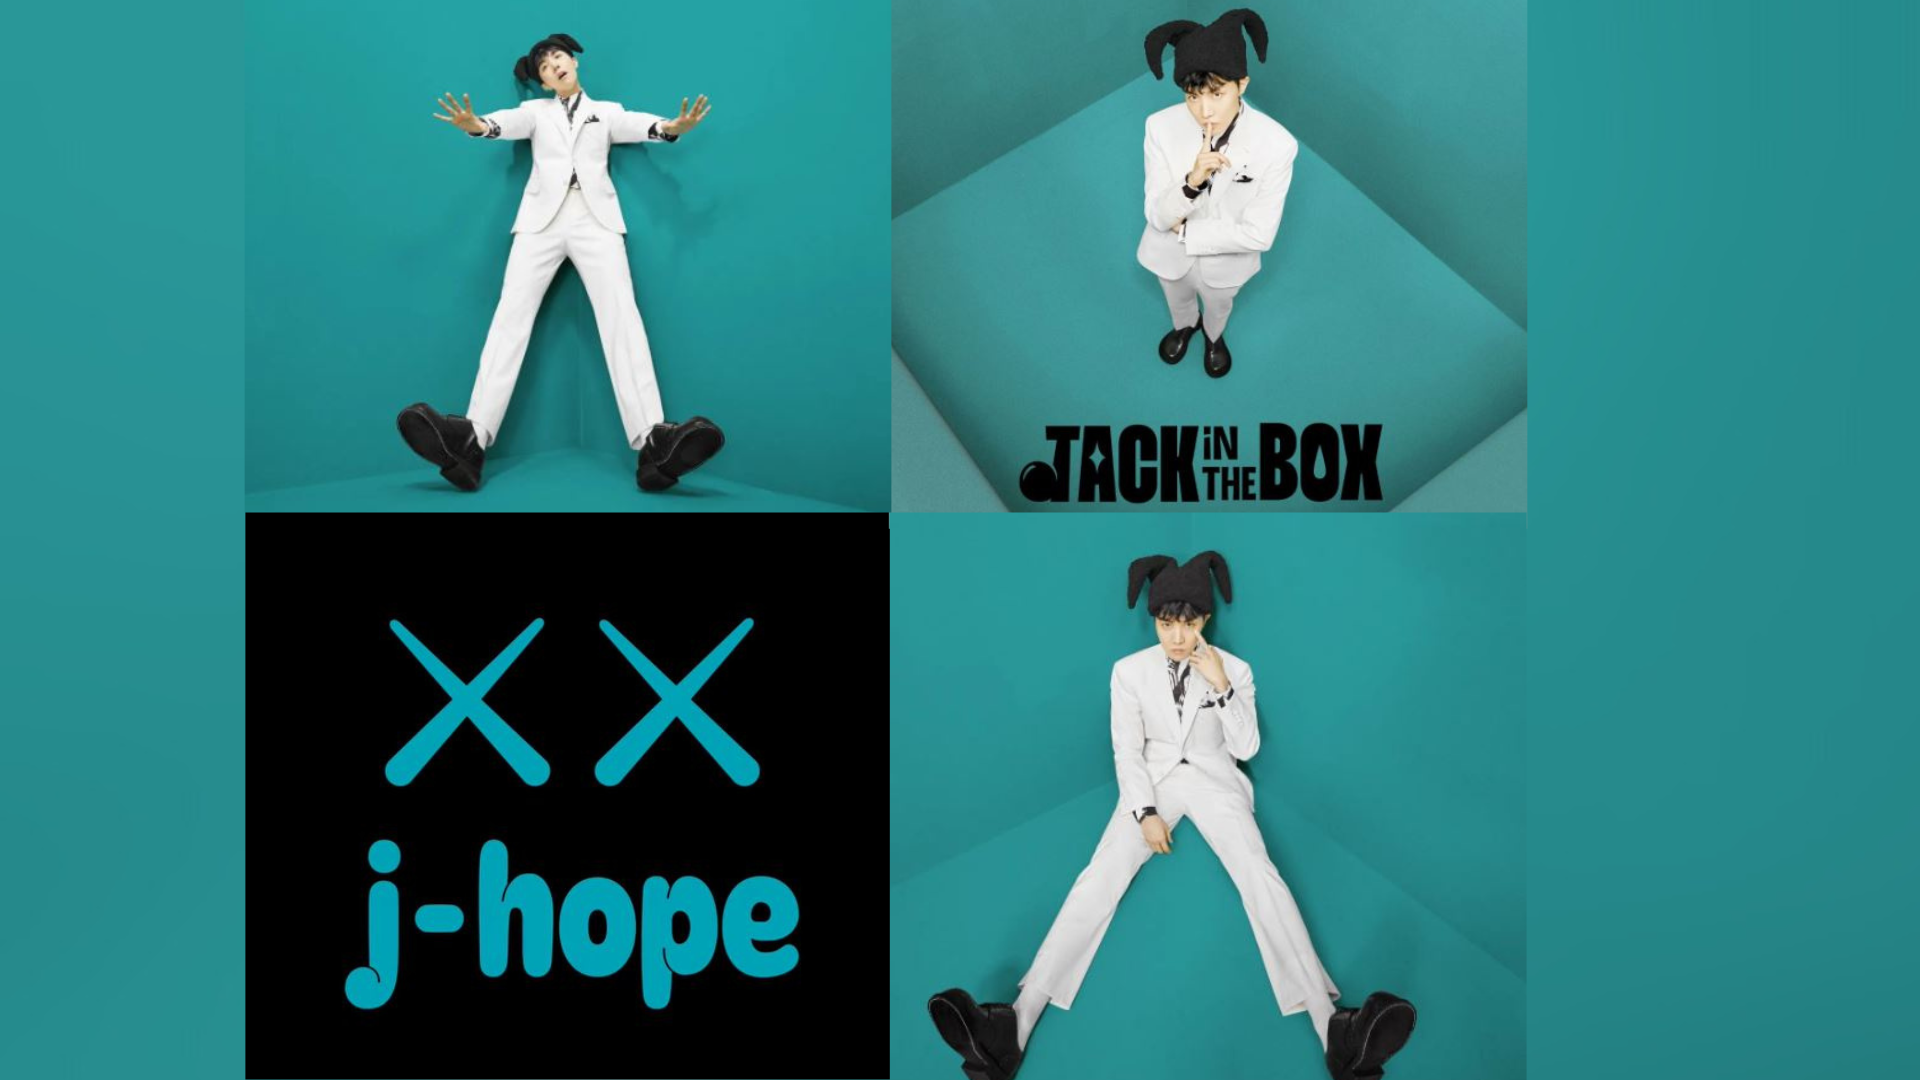 BTS's j-hope steps out as an artist on Jack in the Box